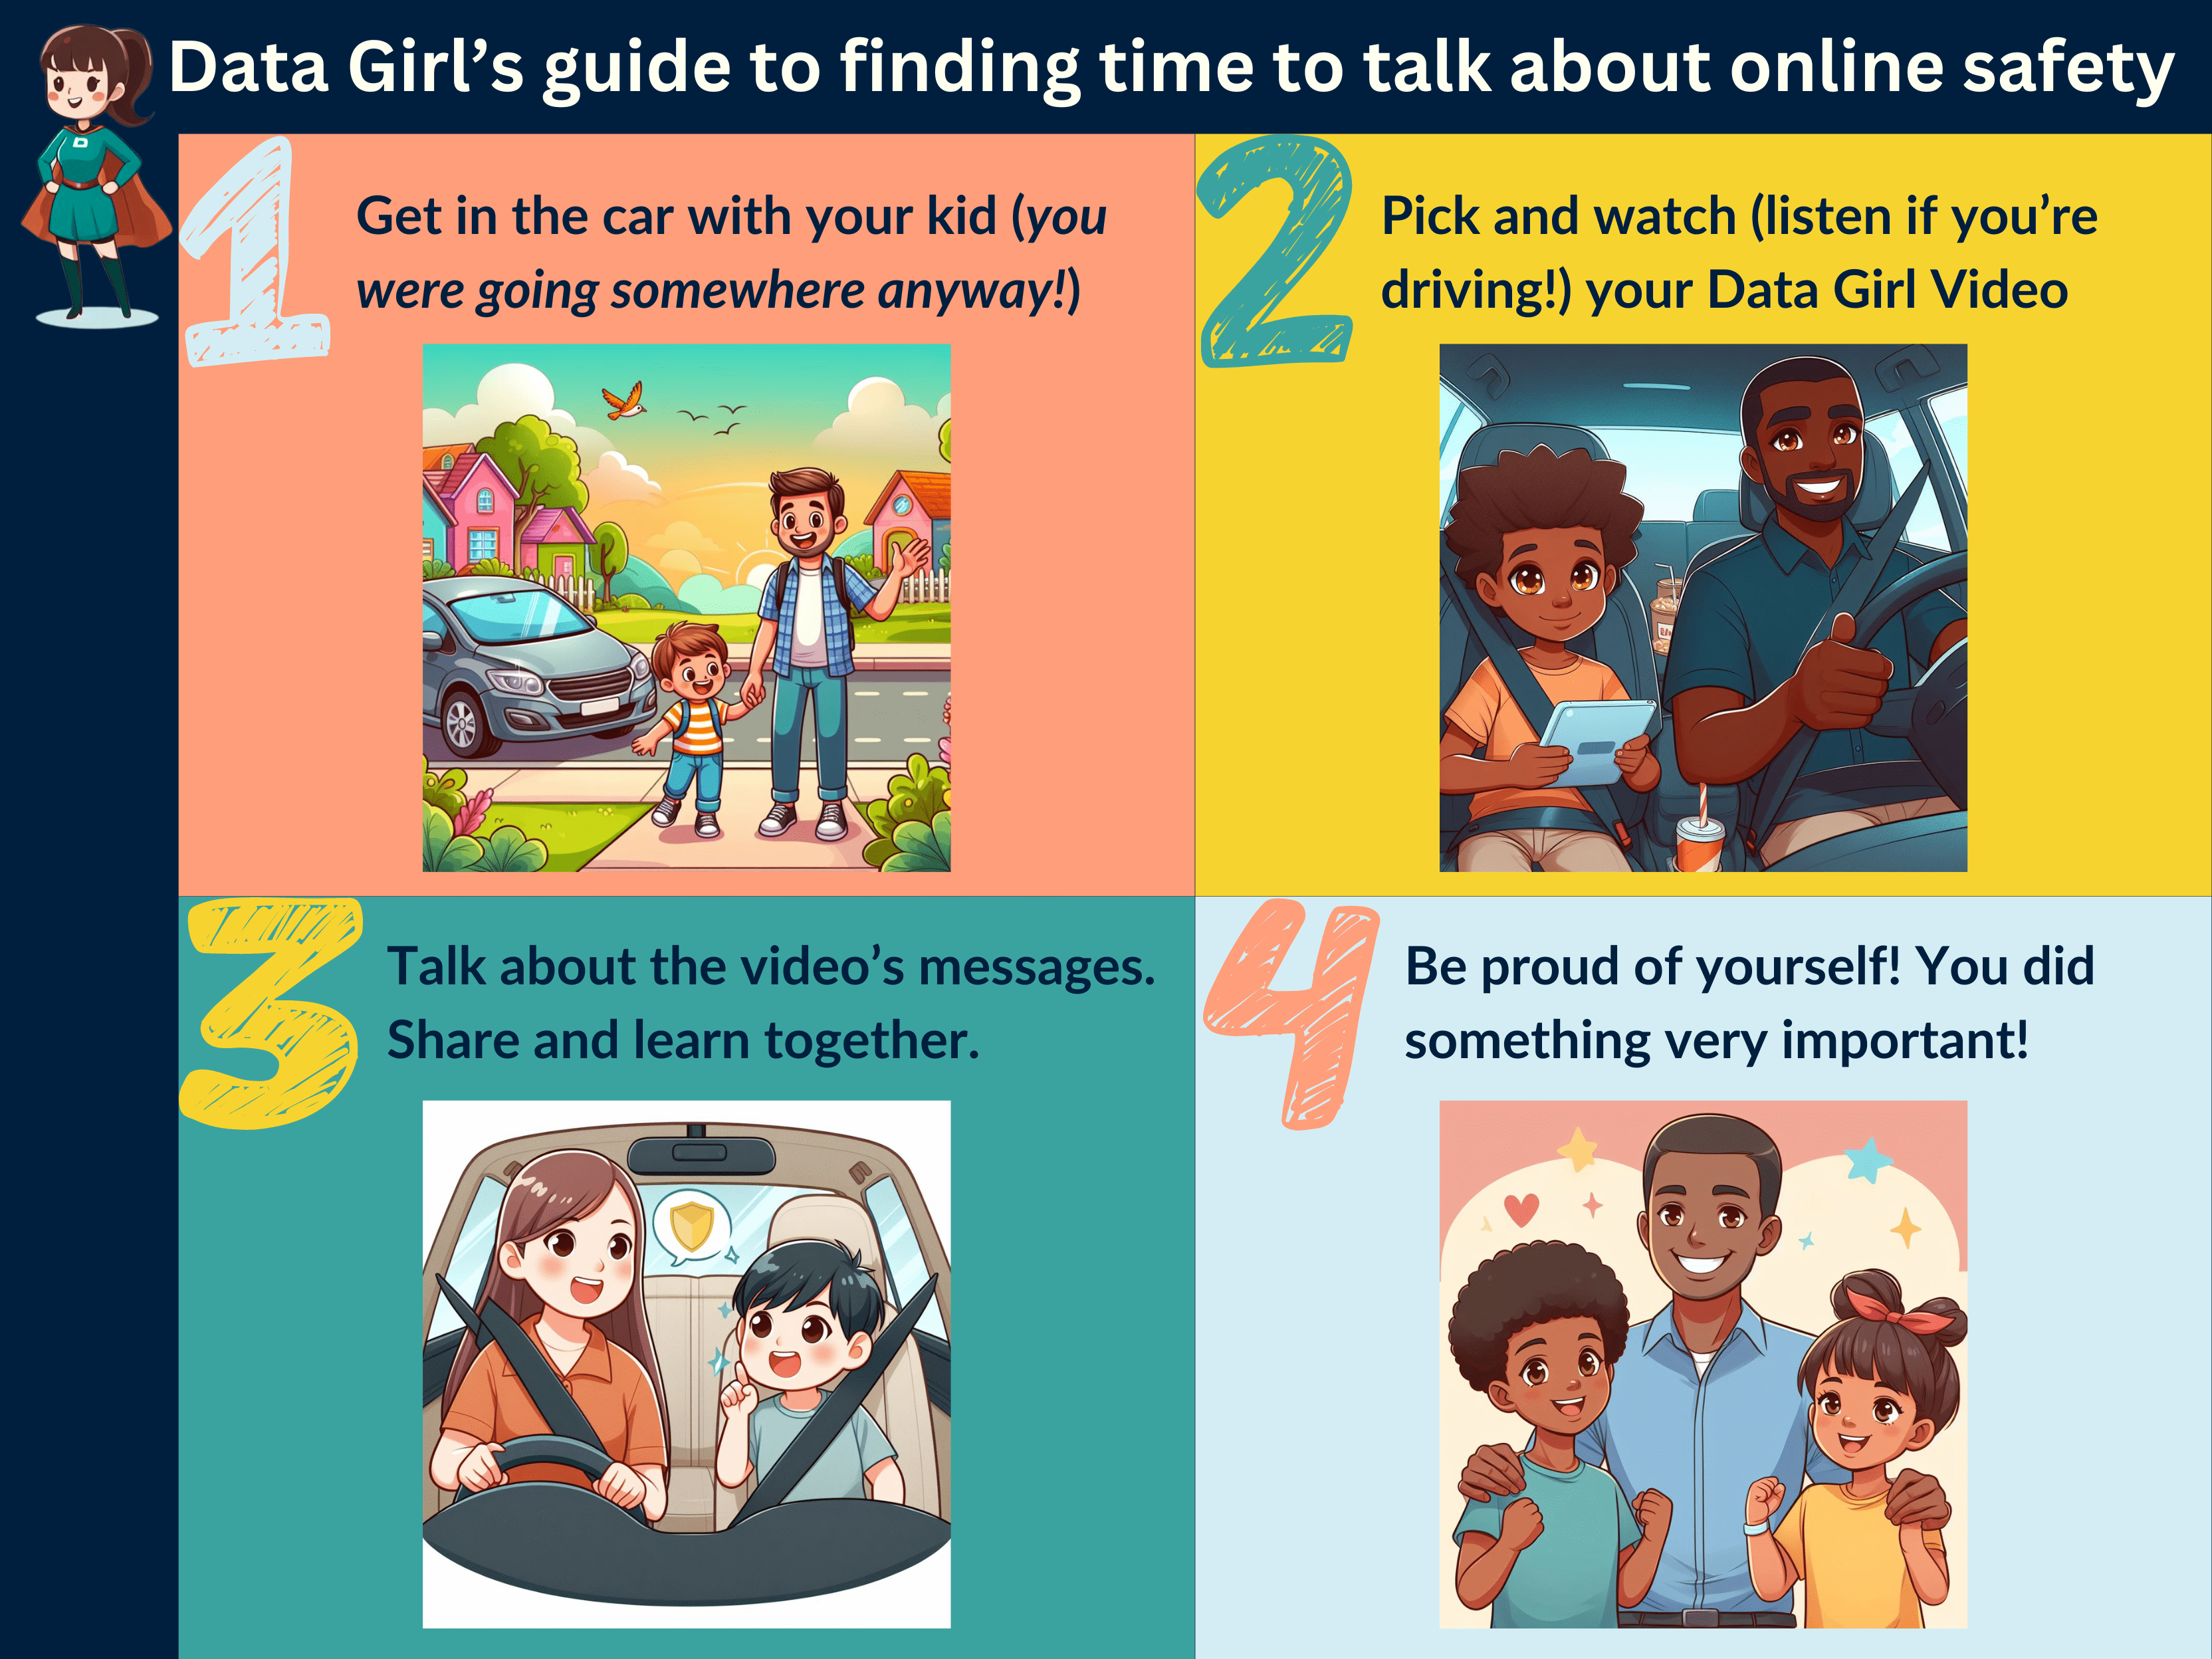 Guide to learning online safety when you're busy